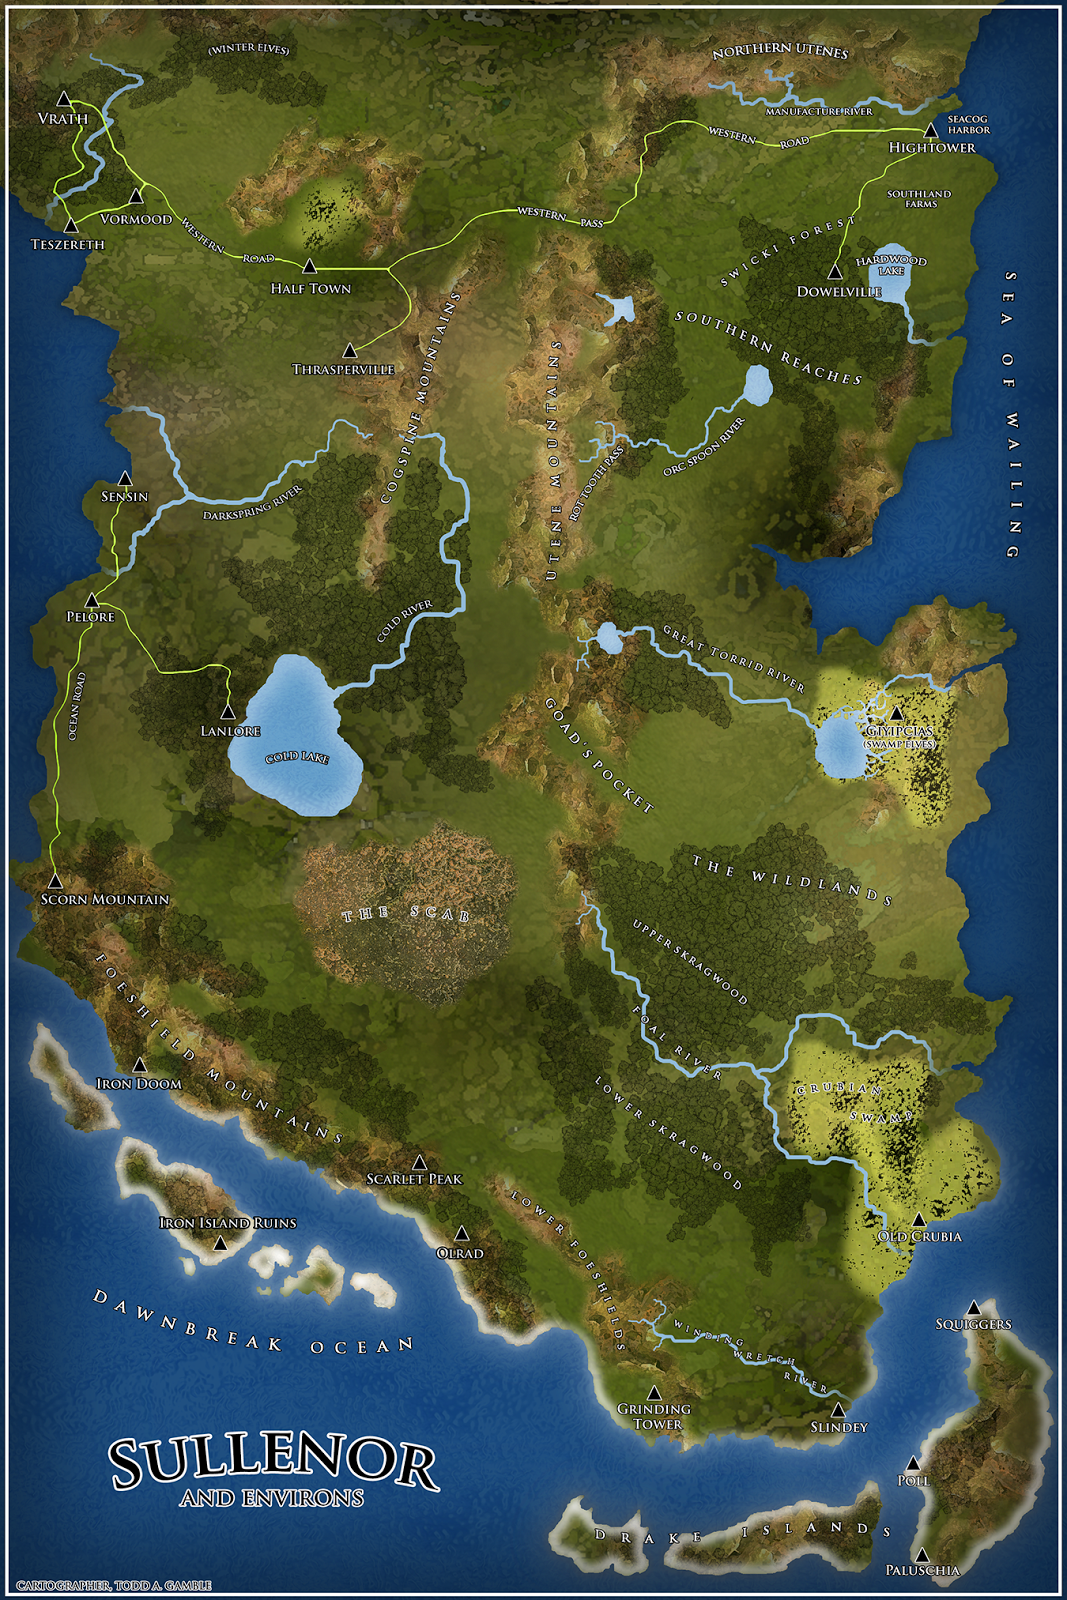 The Art of Todd Gamble: Fantasy Poster Map for Ragnarok Publications in